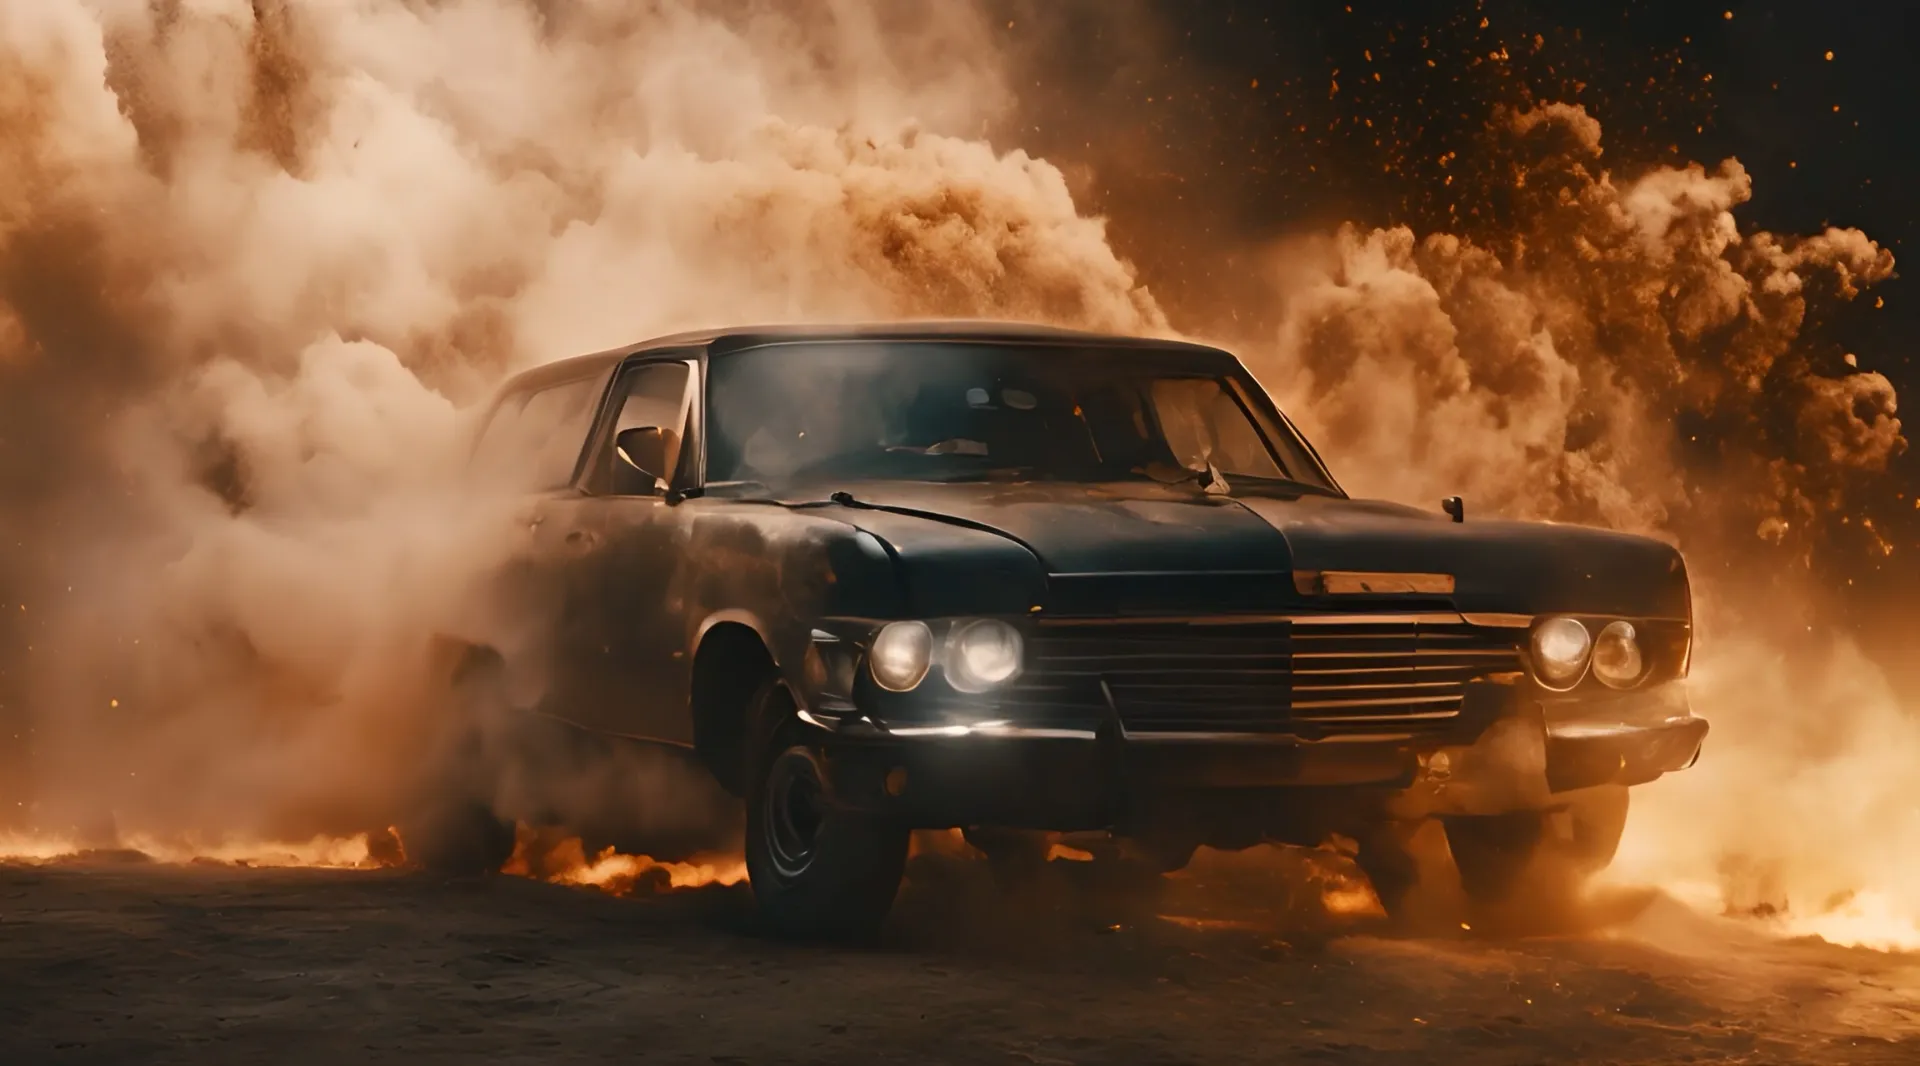 Vintage Car Amidst Flames Cinematic Stock Video